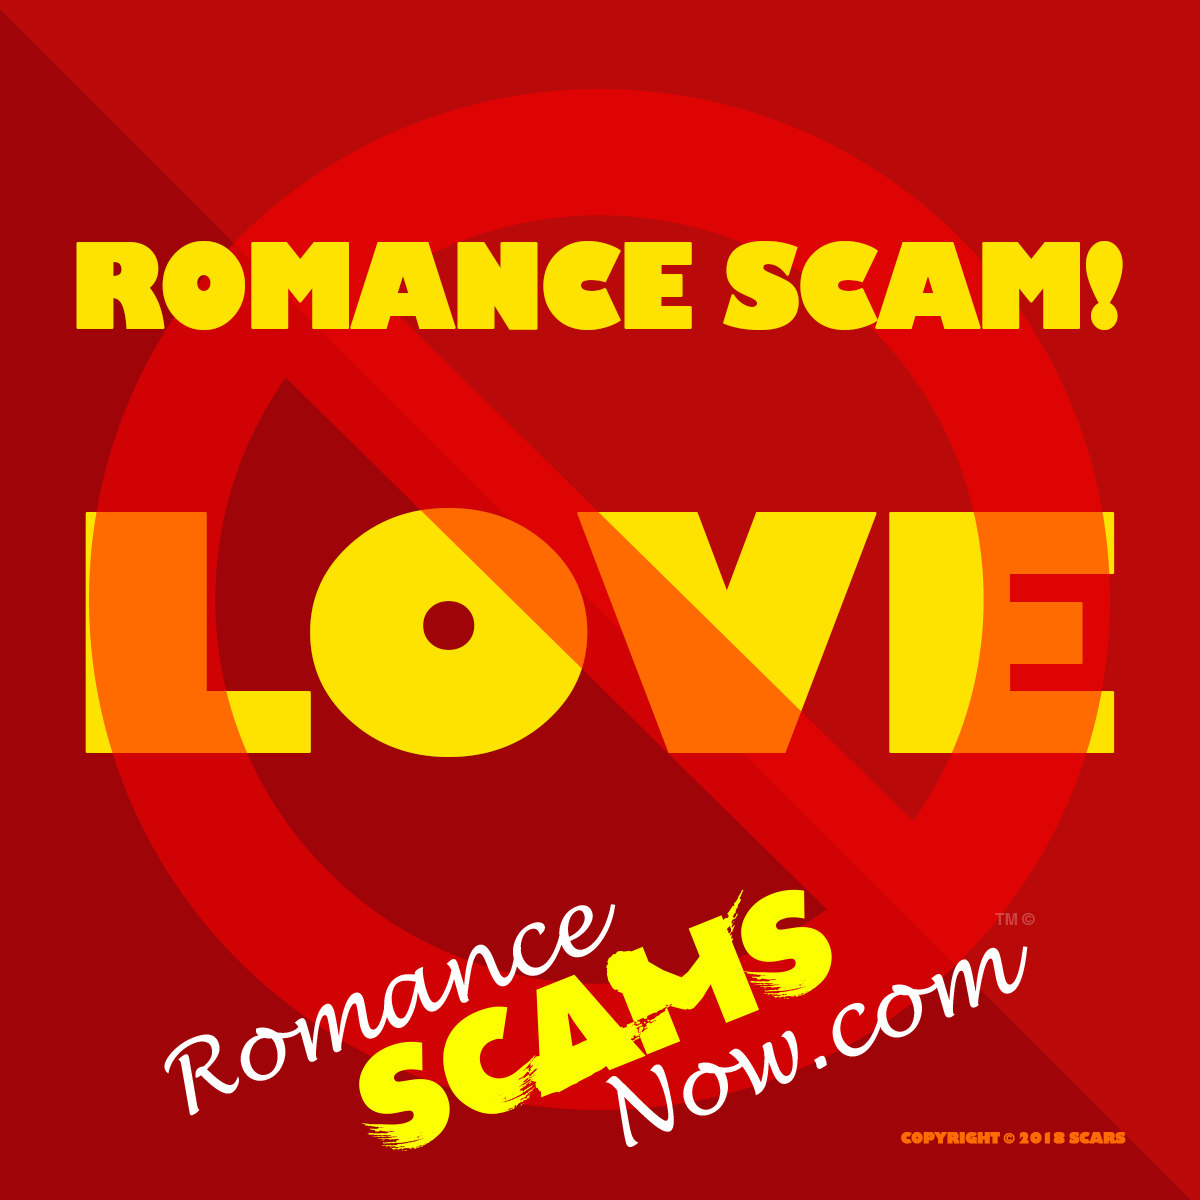 SCARS ™ / RSN™ Anti-Scam Poster 96